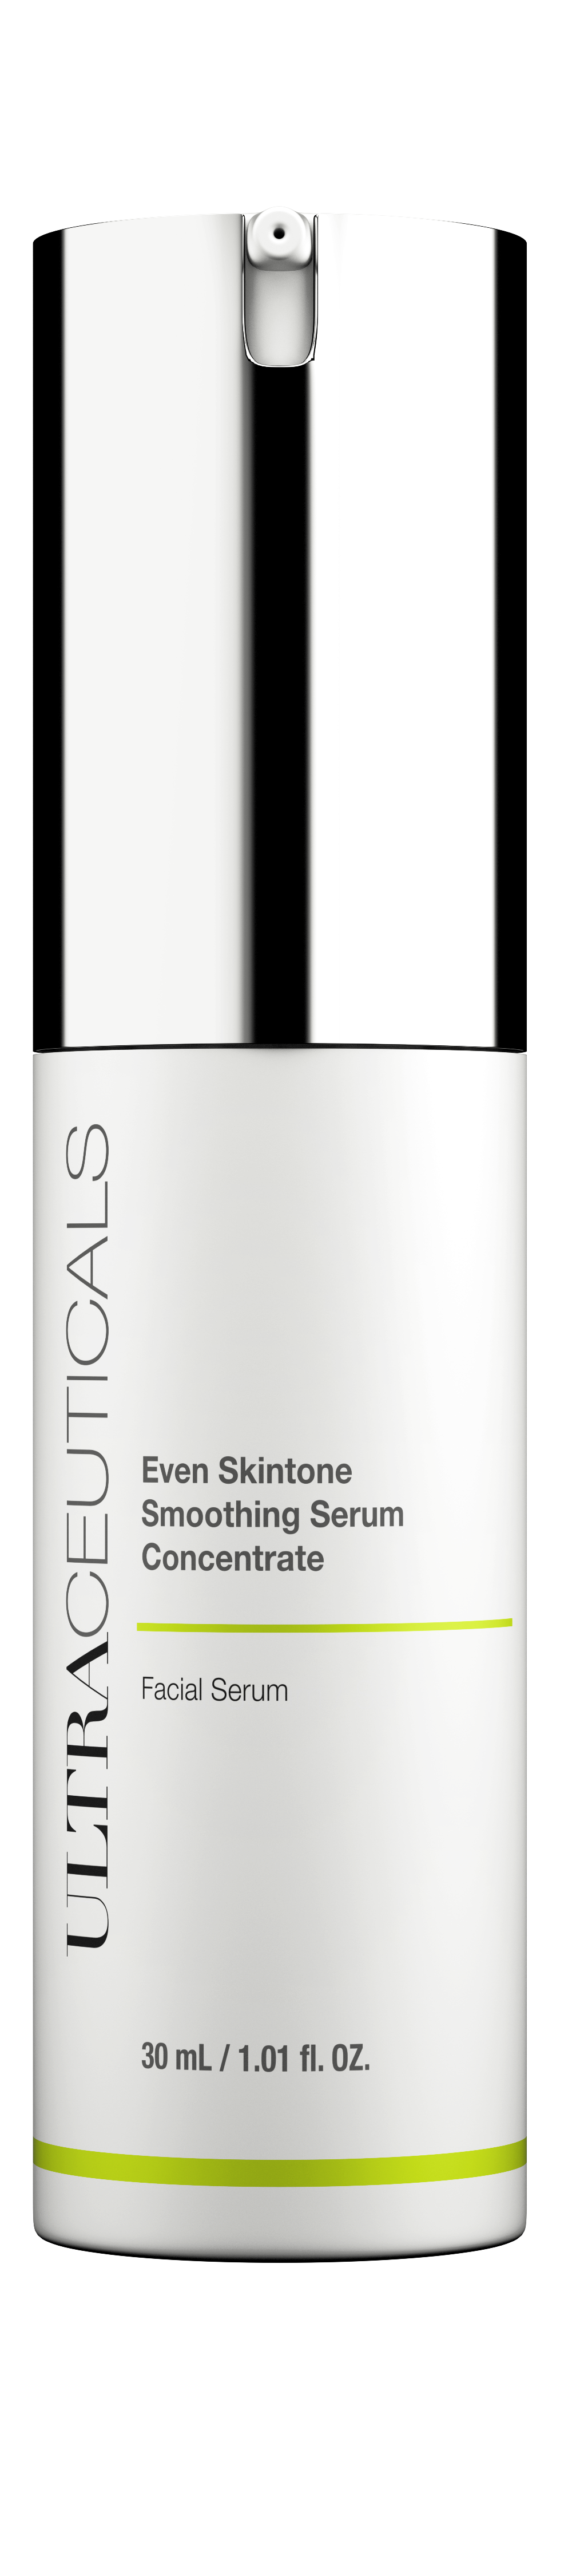 Even Skintone Smoothing Serum Concentrate 30ml